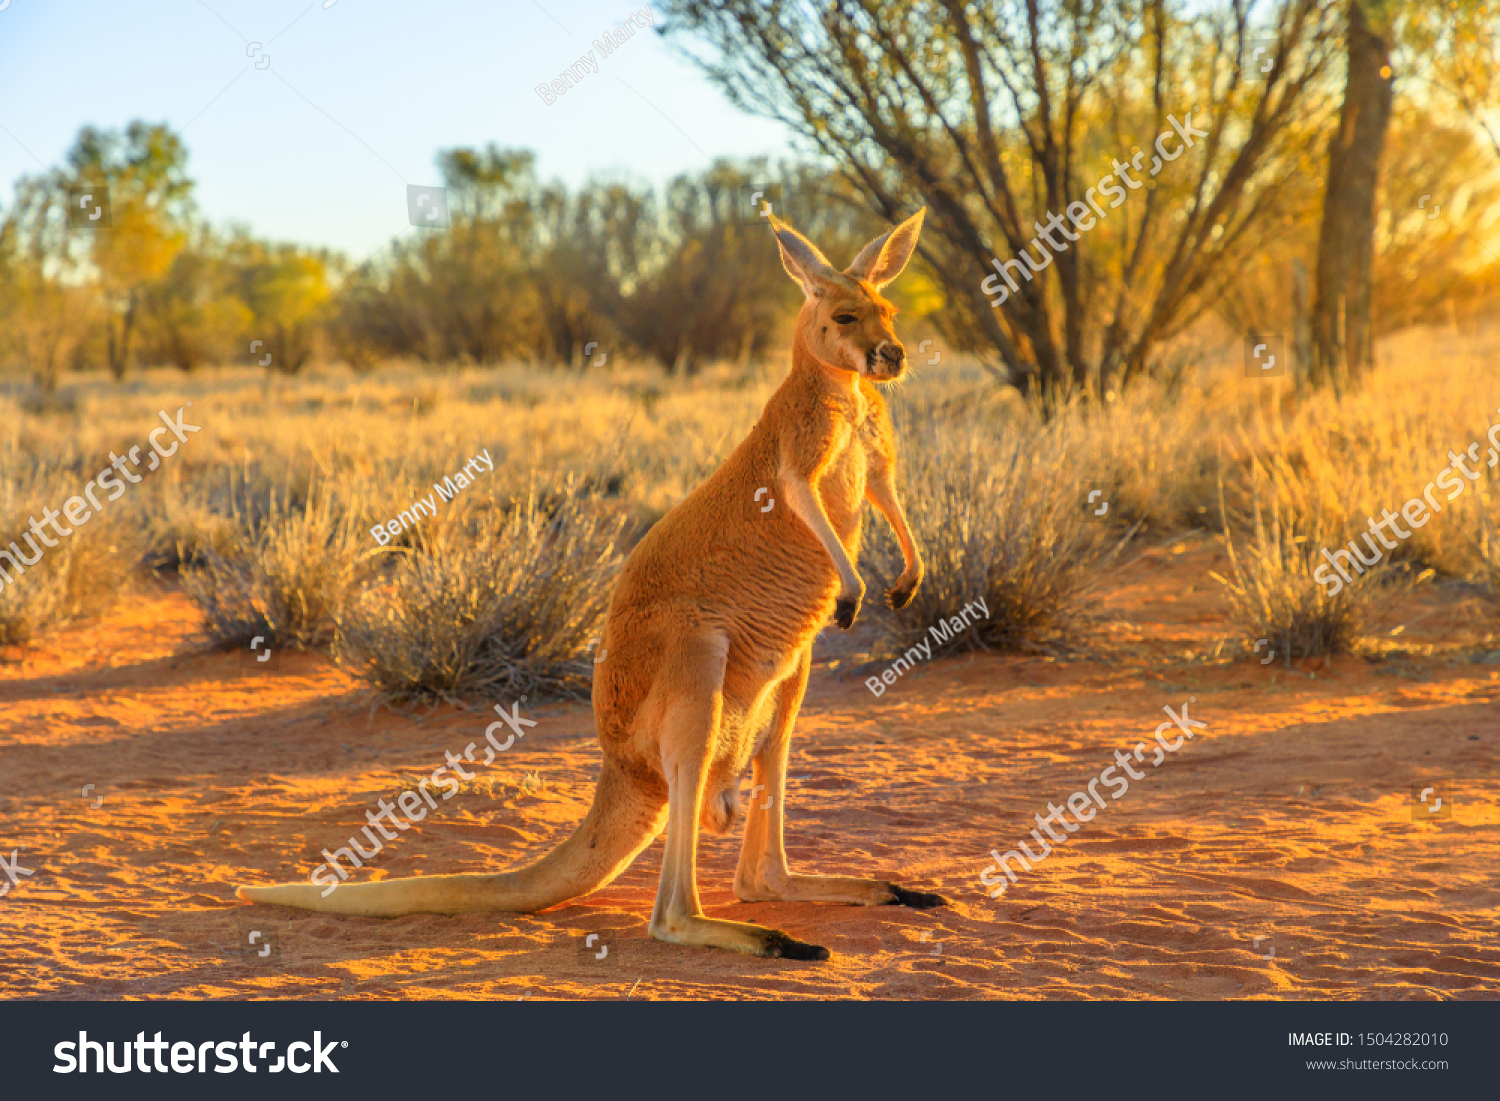 Side view of red kangaroo, Macropus rufus, standing on the red sand of outback central Australia. Australian Marsupial in Northern Territory, Red Center. Desert landscape at golden sunset. #1504282010